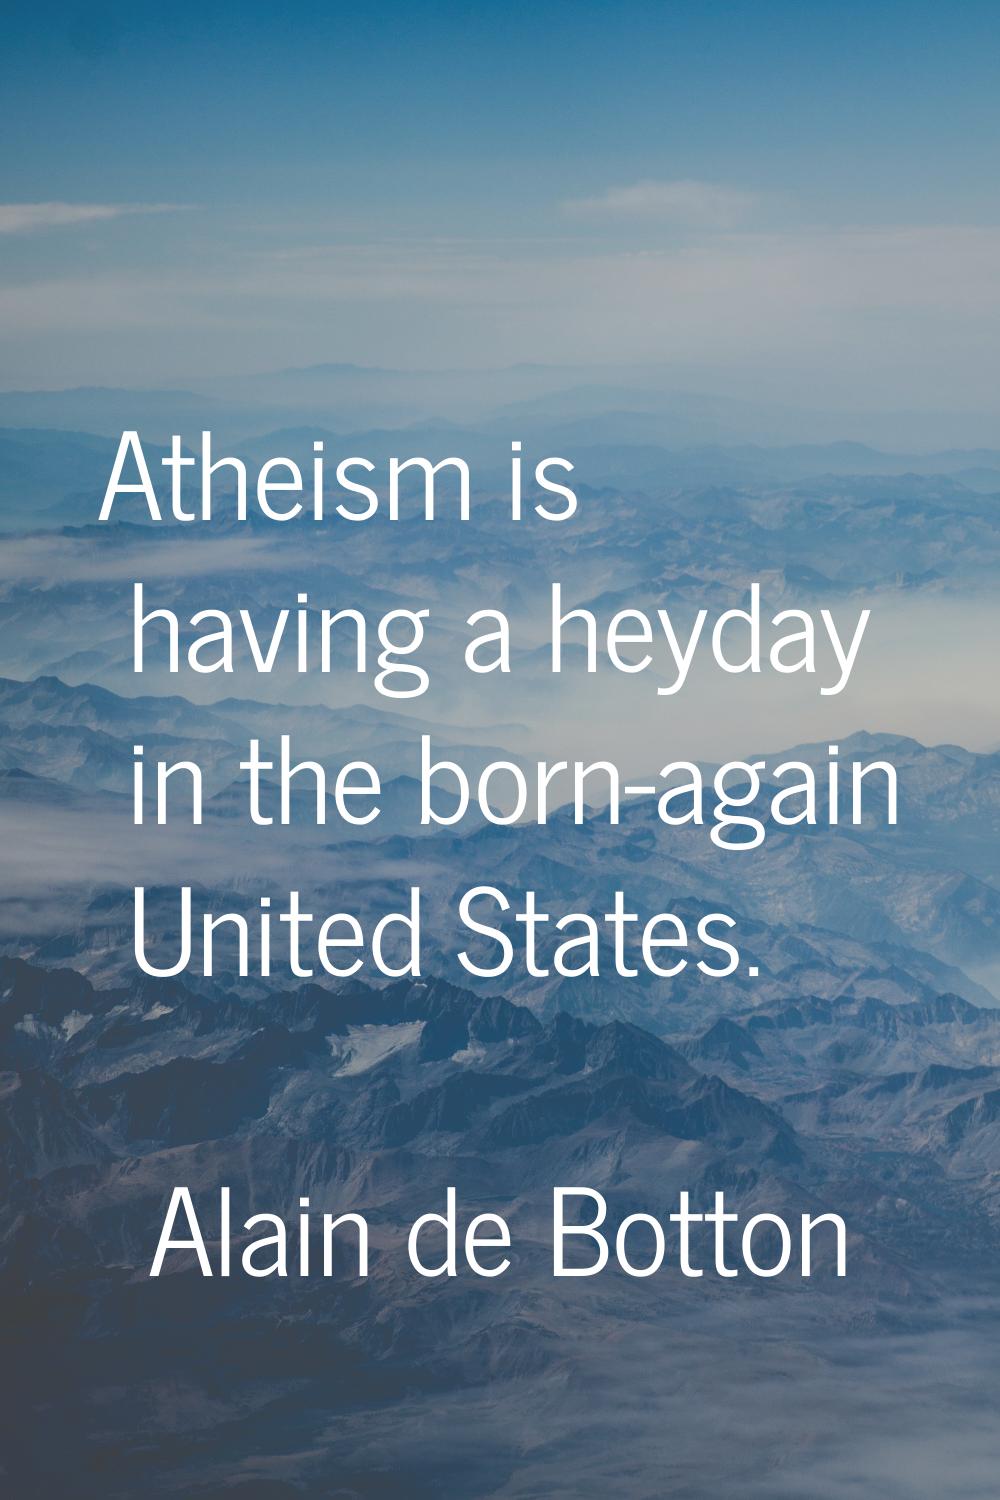 Atheism is having a heyday in the born-again United States.